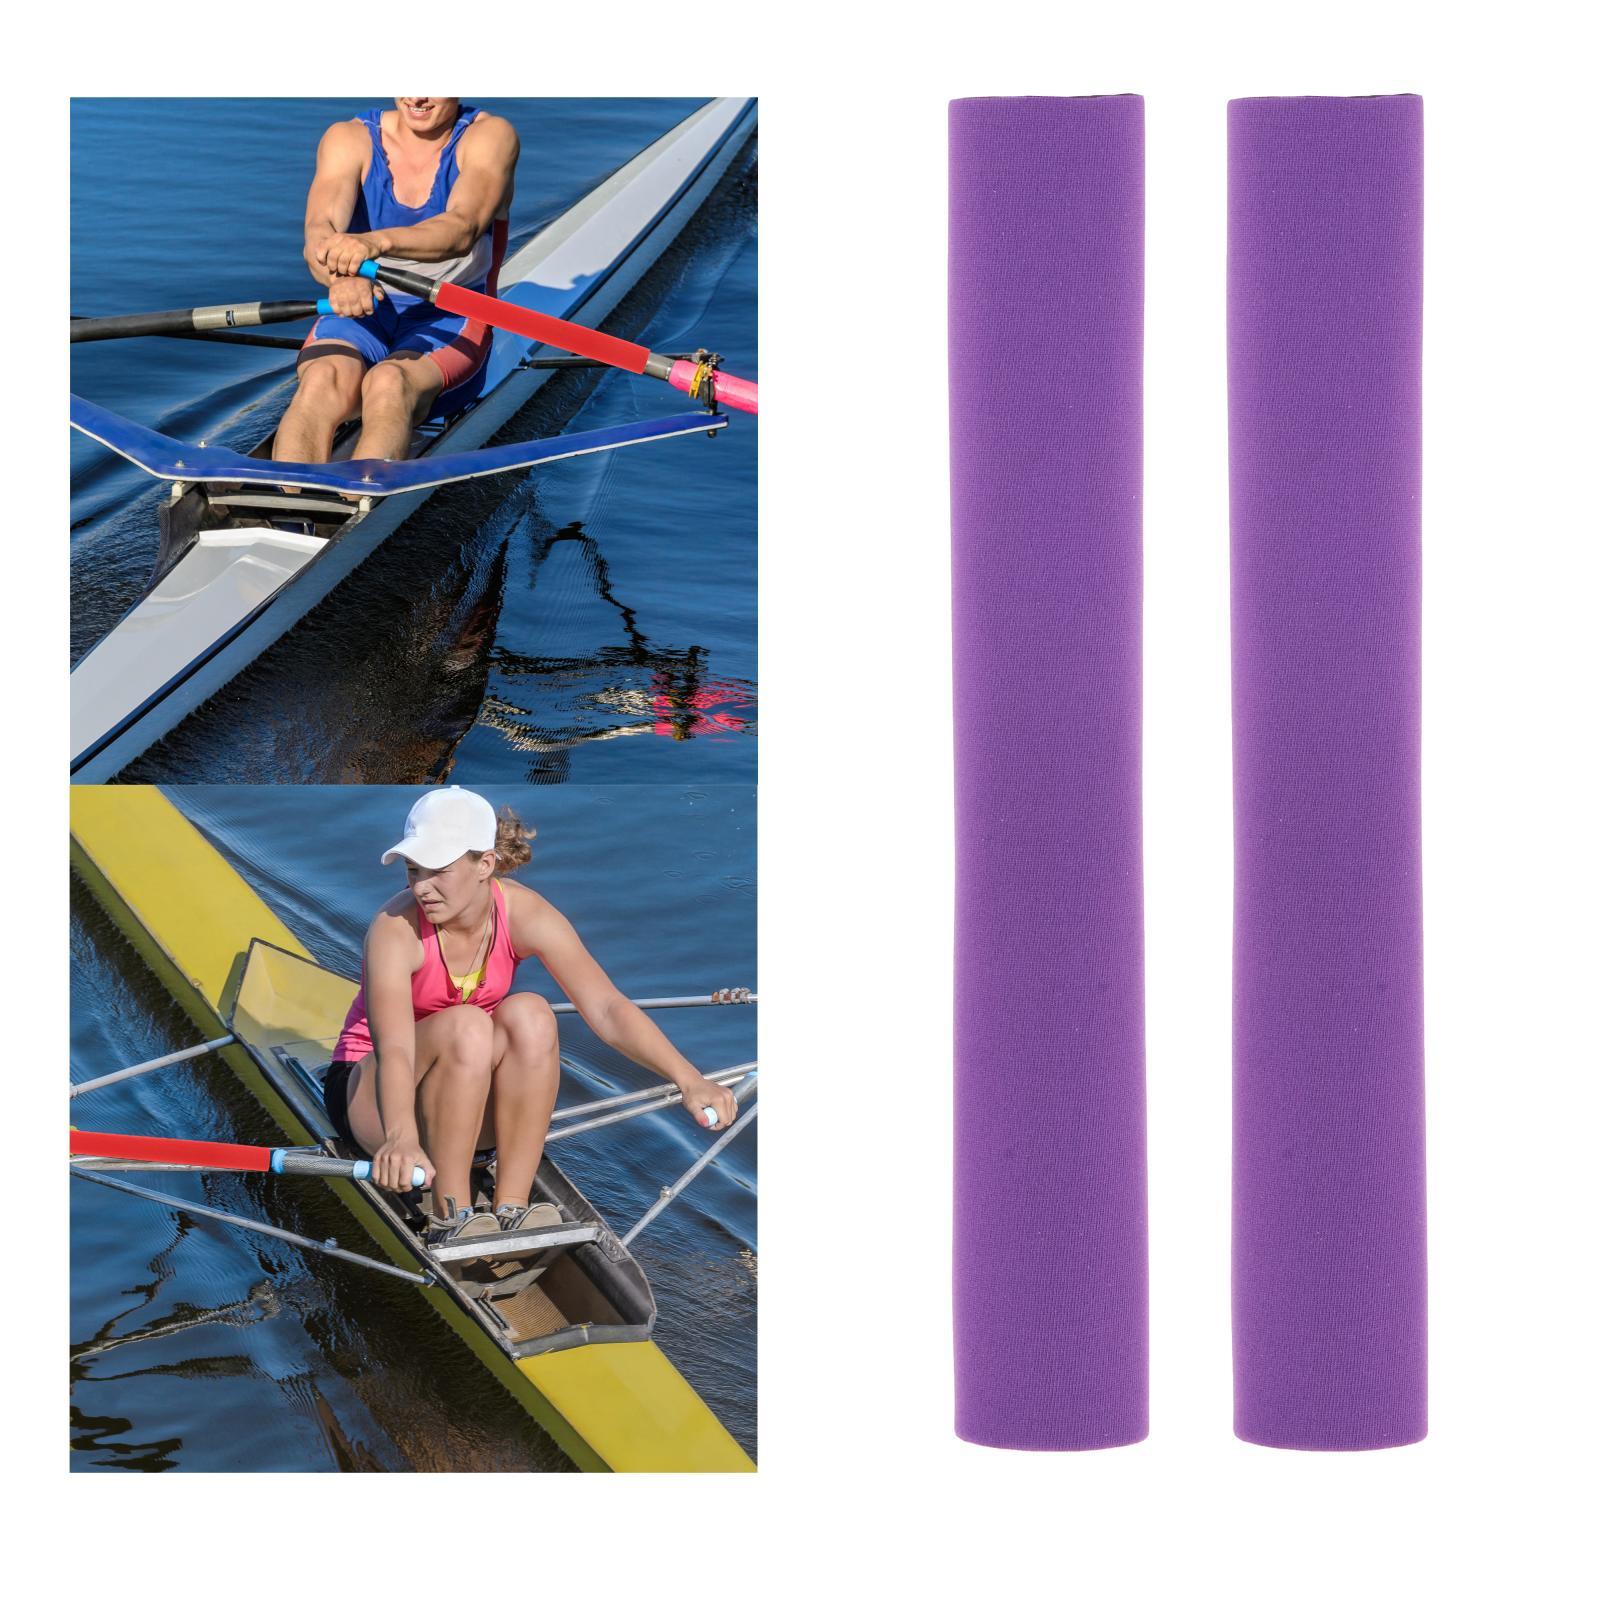 2Pcs Diving Fabric Non-slip Paddle Grip Protect Sleeves Prevent Covers Wrap Purple